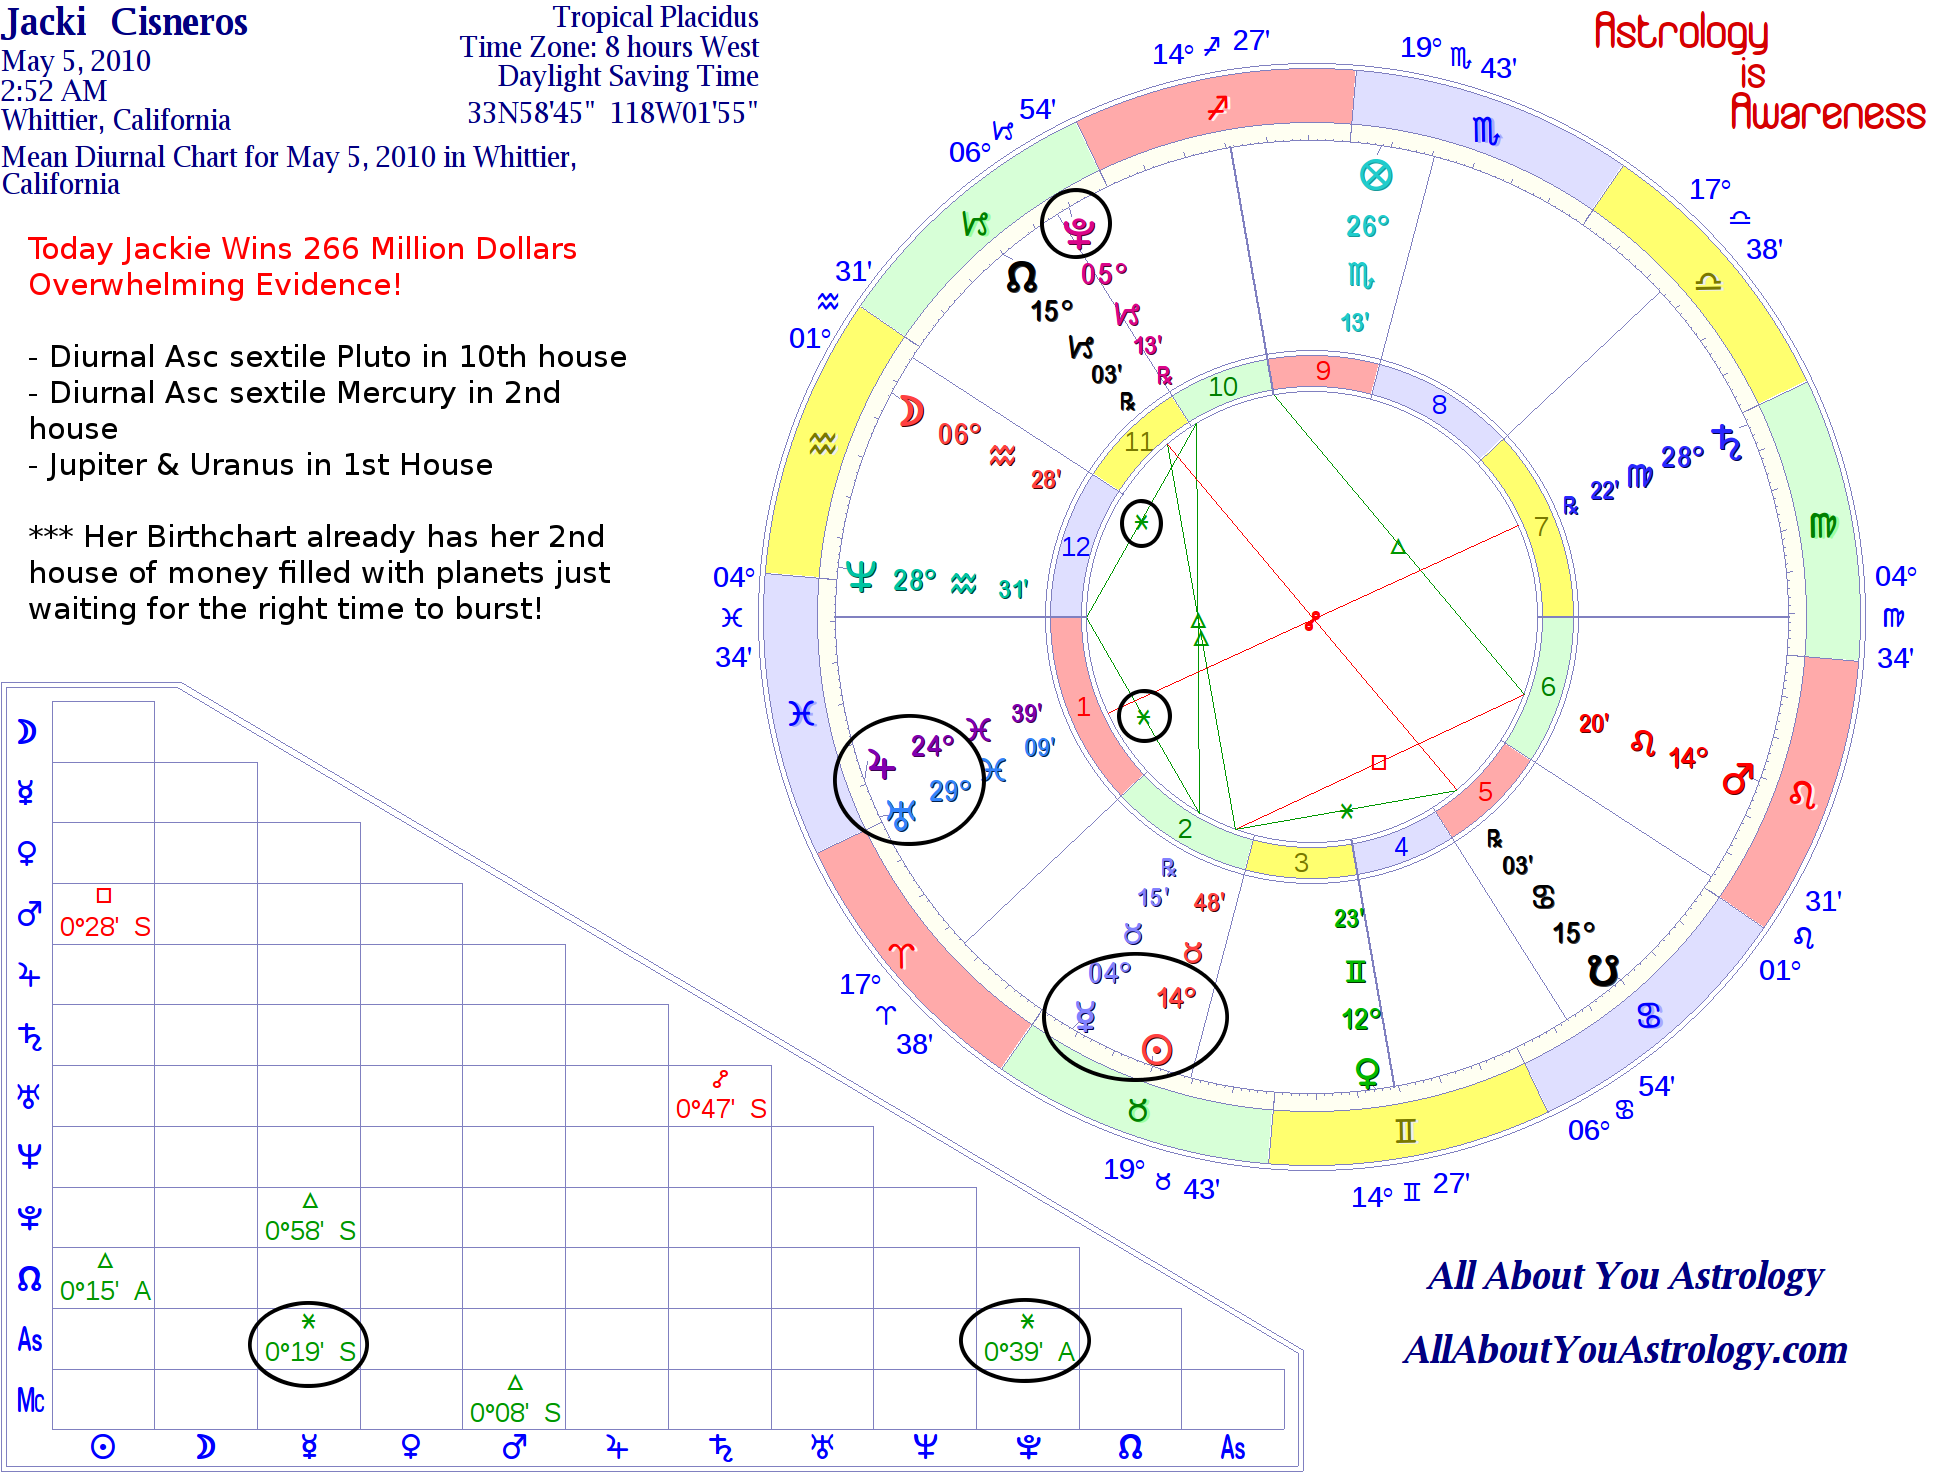 Astrology Charts Of Billionaires